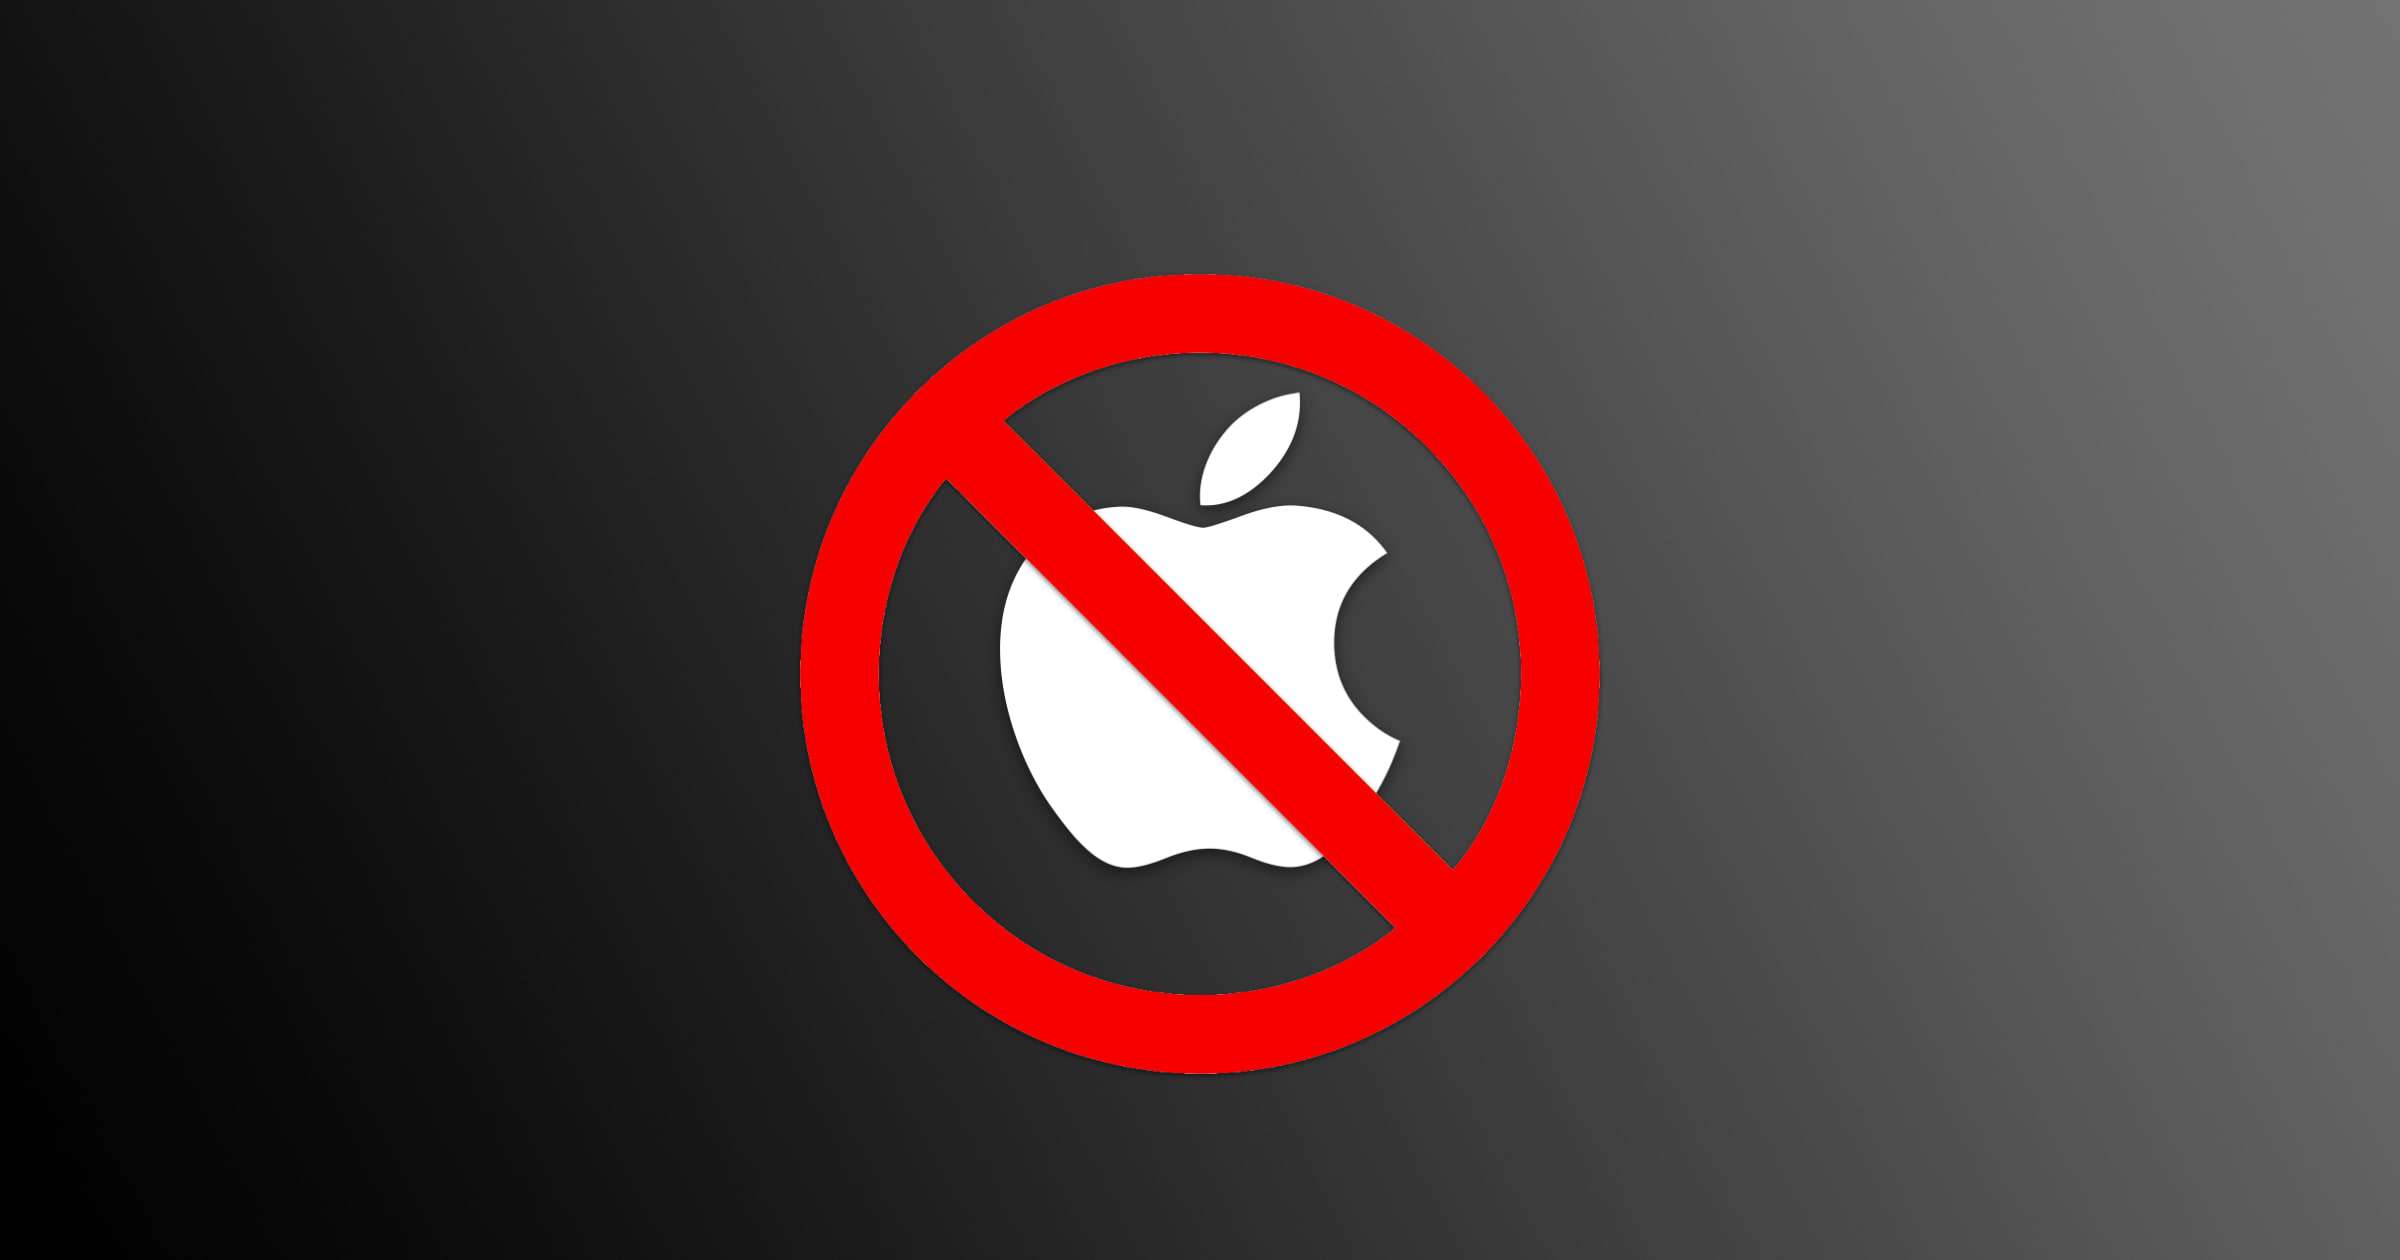 NoSpyPhone Protests Planned at Apple Stores in Major Cities